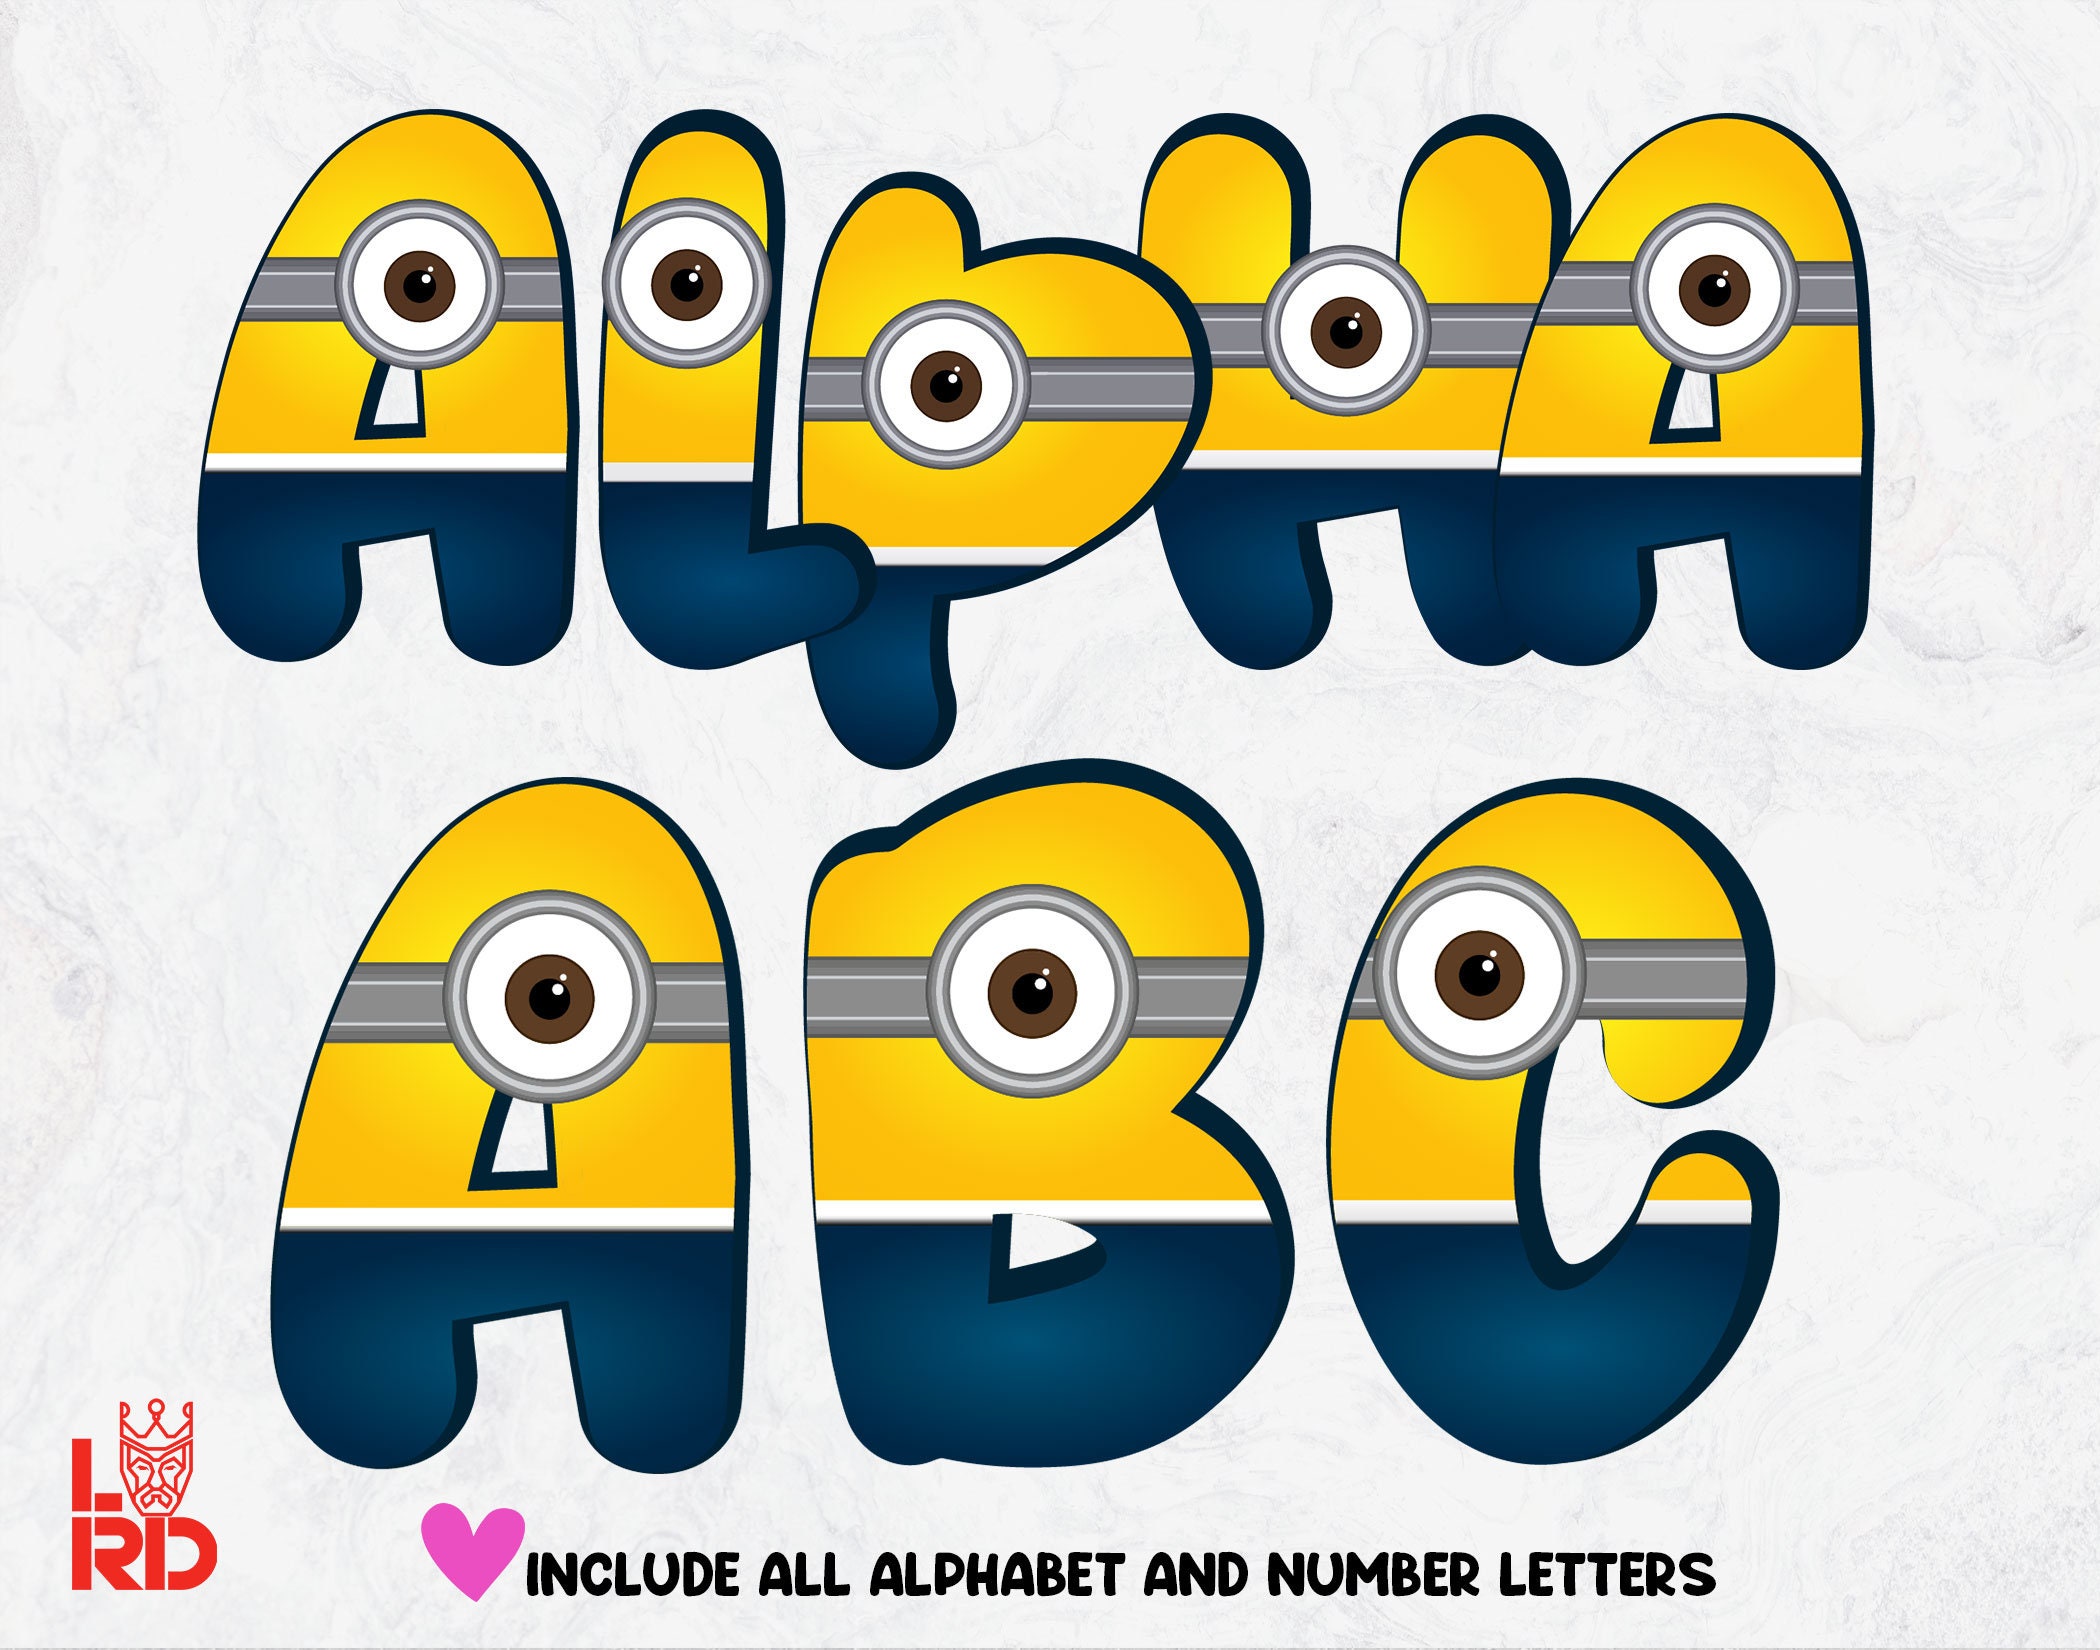 Despicable Me Alphabet PNG, Cartoon Character Letters PNG, Character ...